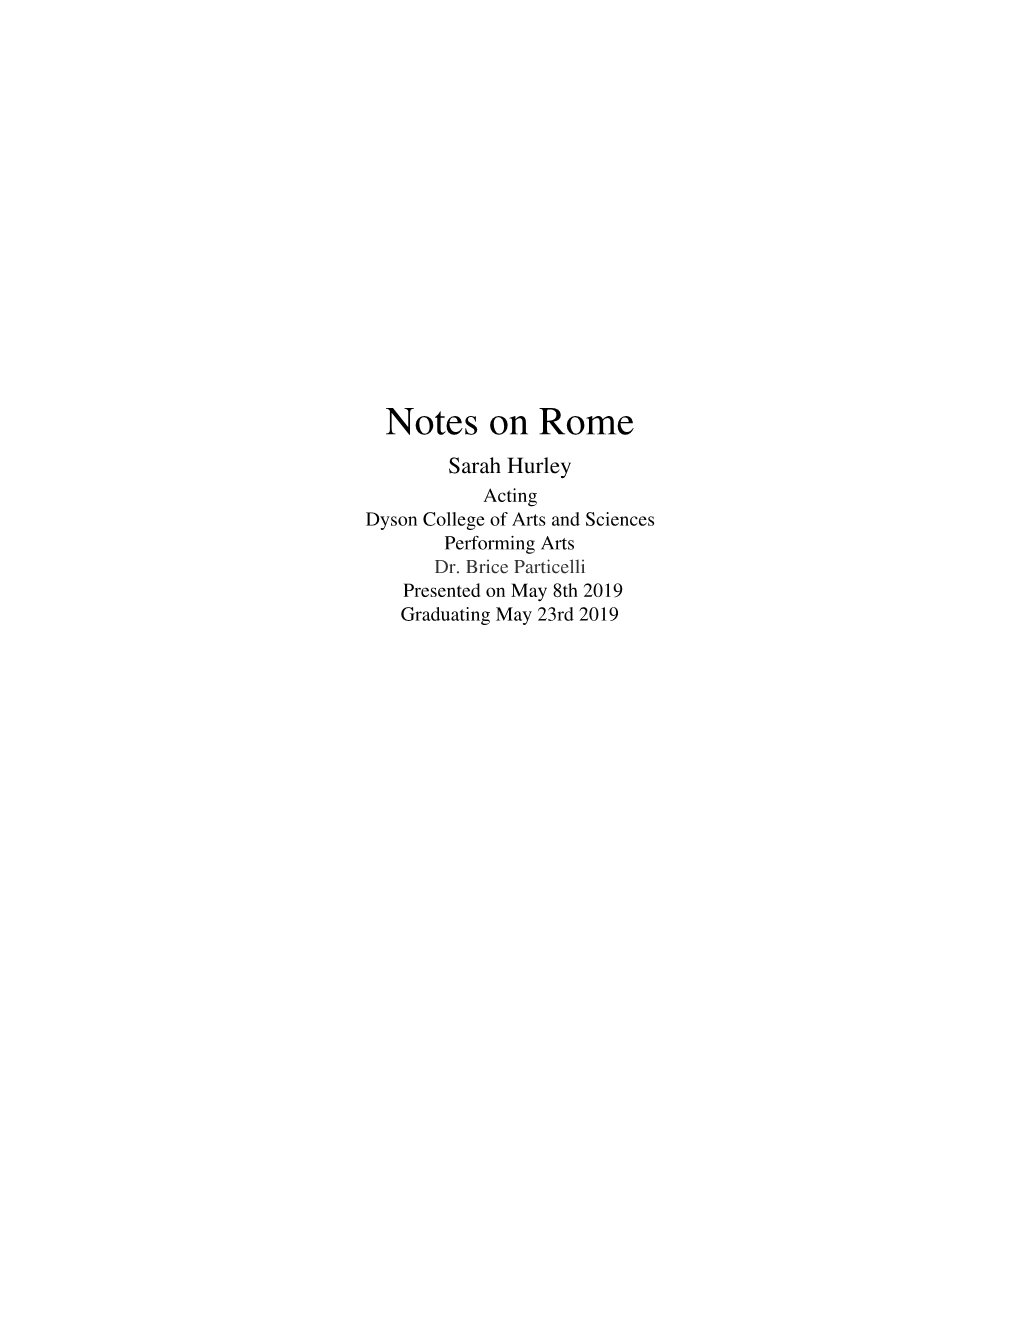 Notes on Rome Sarah Hurley Acting Dyson College of Arts and Sciences Performing Arts Dr